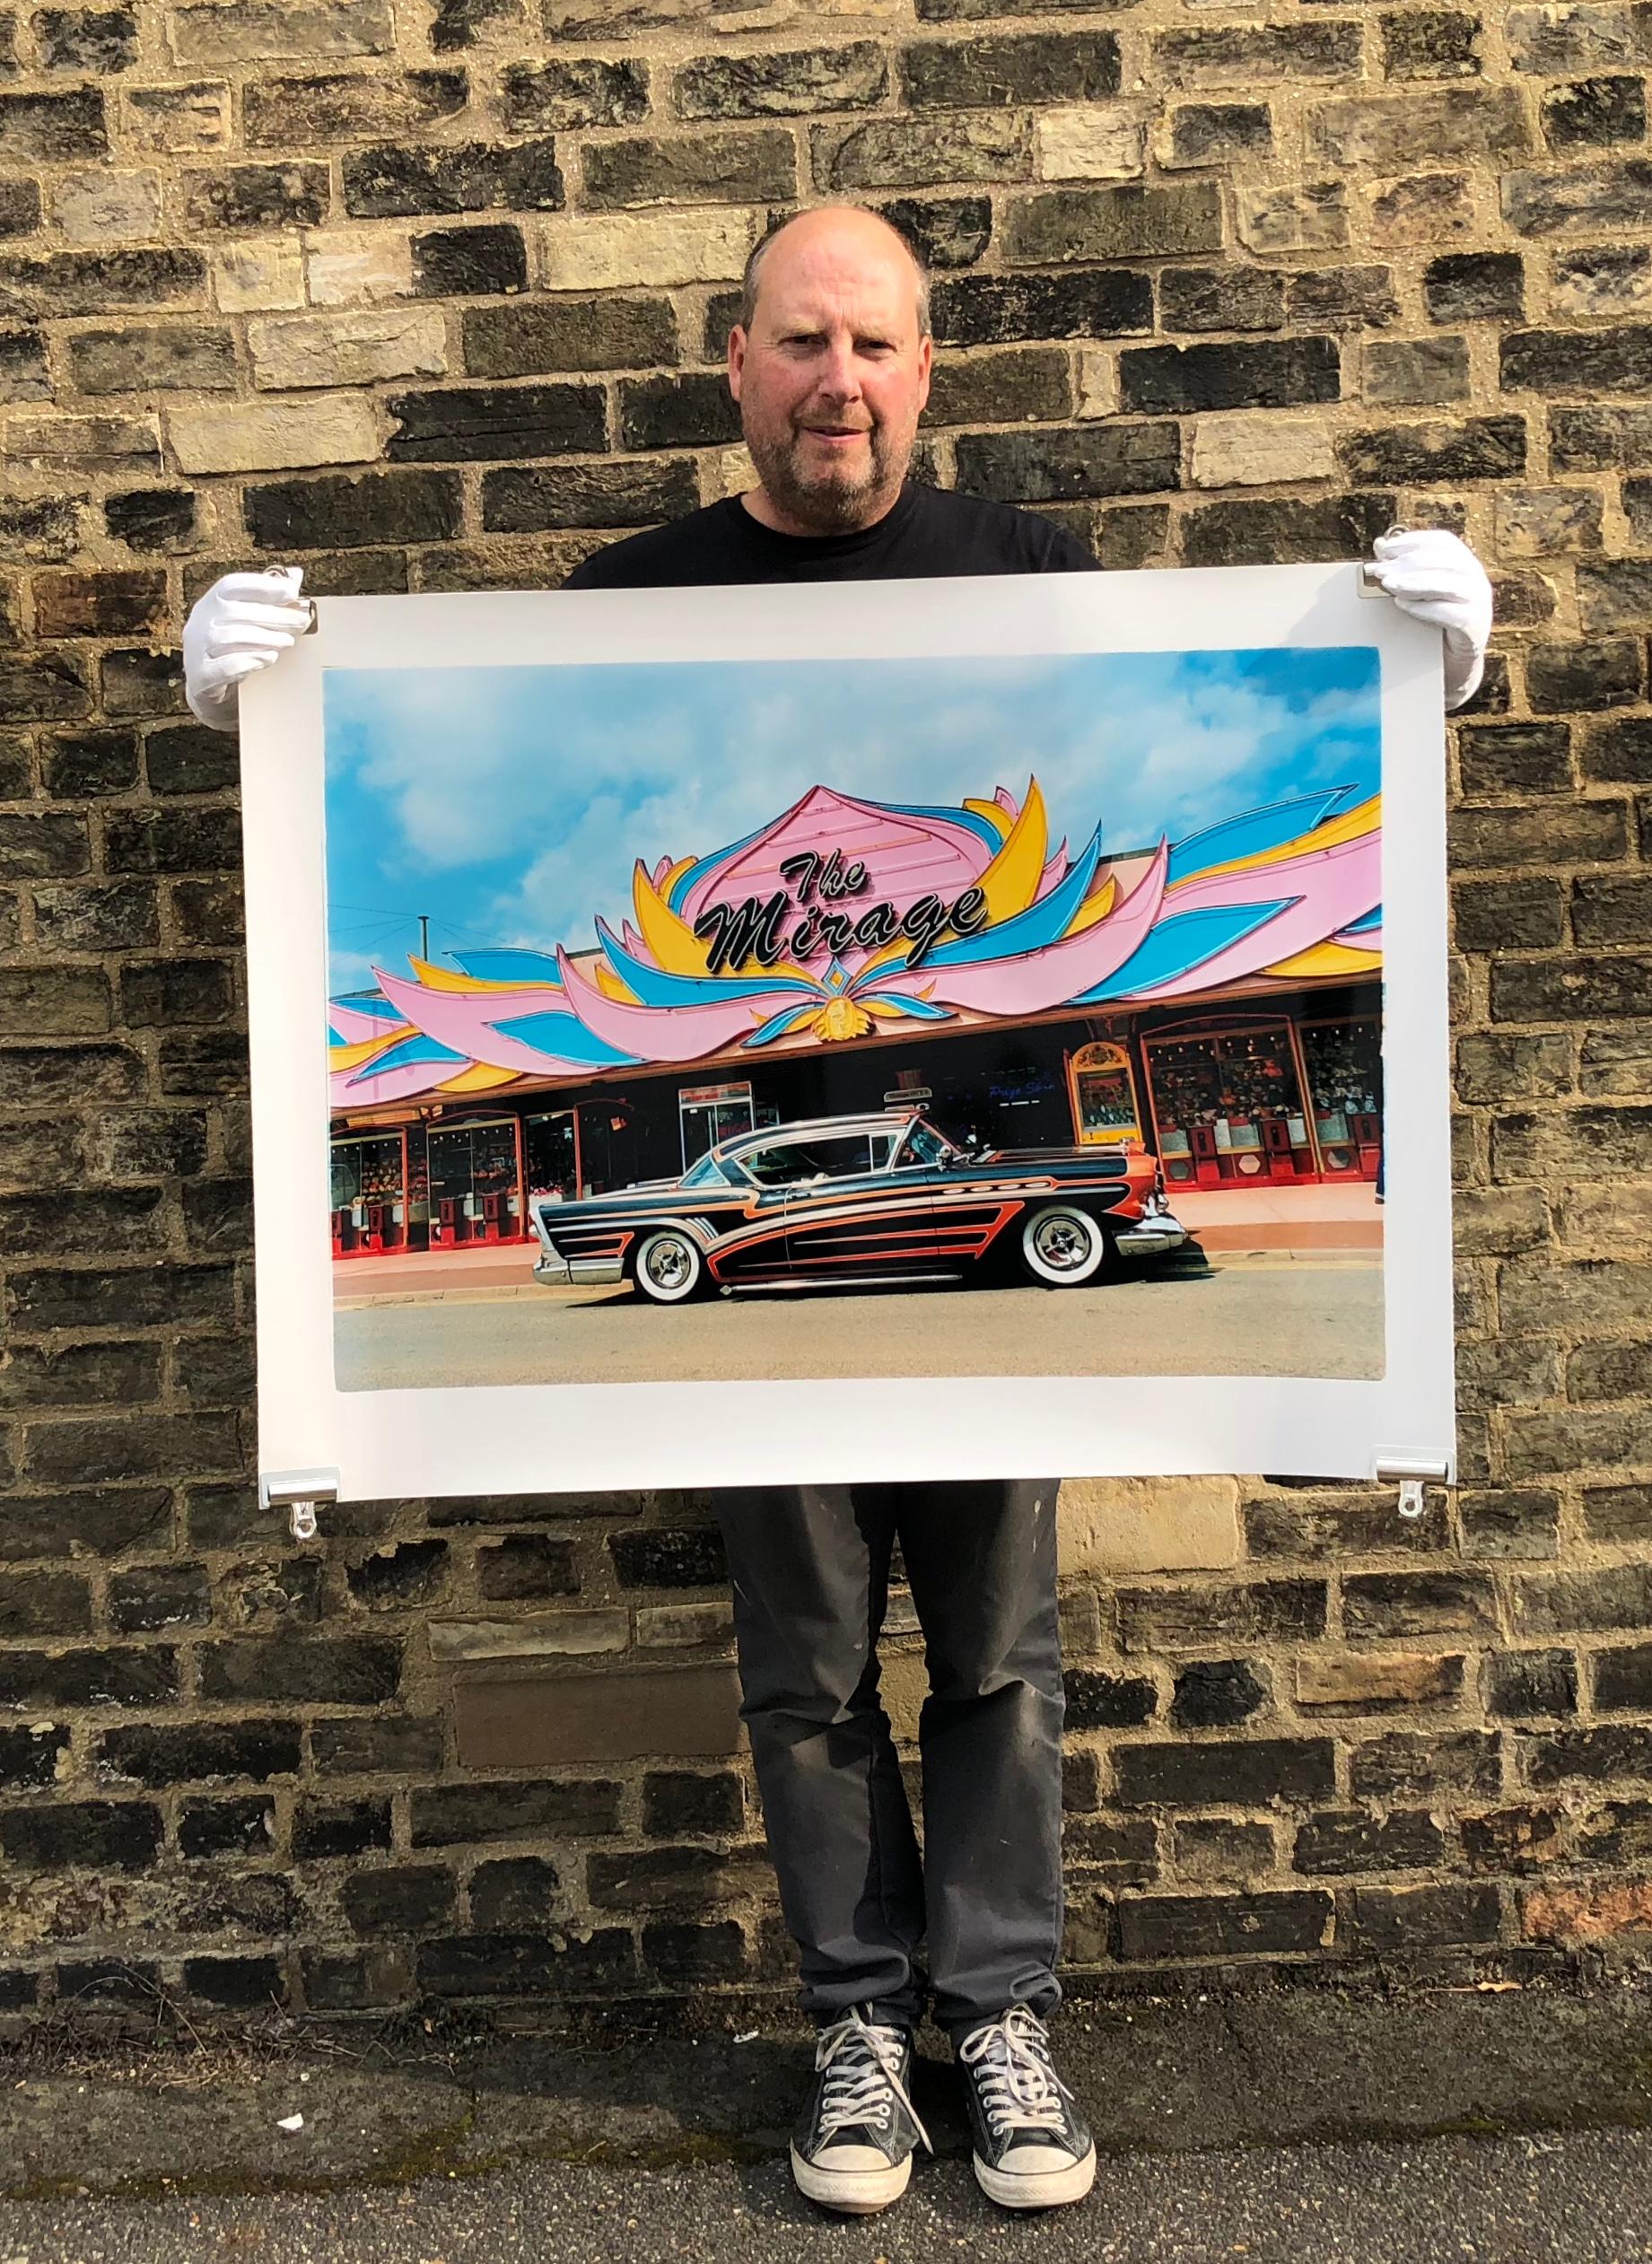 Part of Richard Heeps 'Man's Ruin' Series, this beautiful customised Classic American Car, against this Las Vegas themed facade is so stylish you would think it was staged, but it's not, it's the real the real thing.

This artwork is a limited